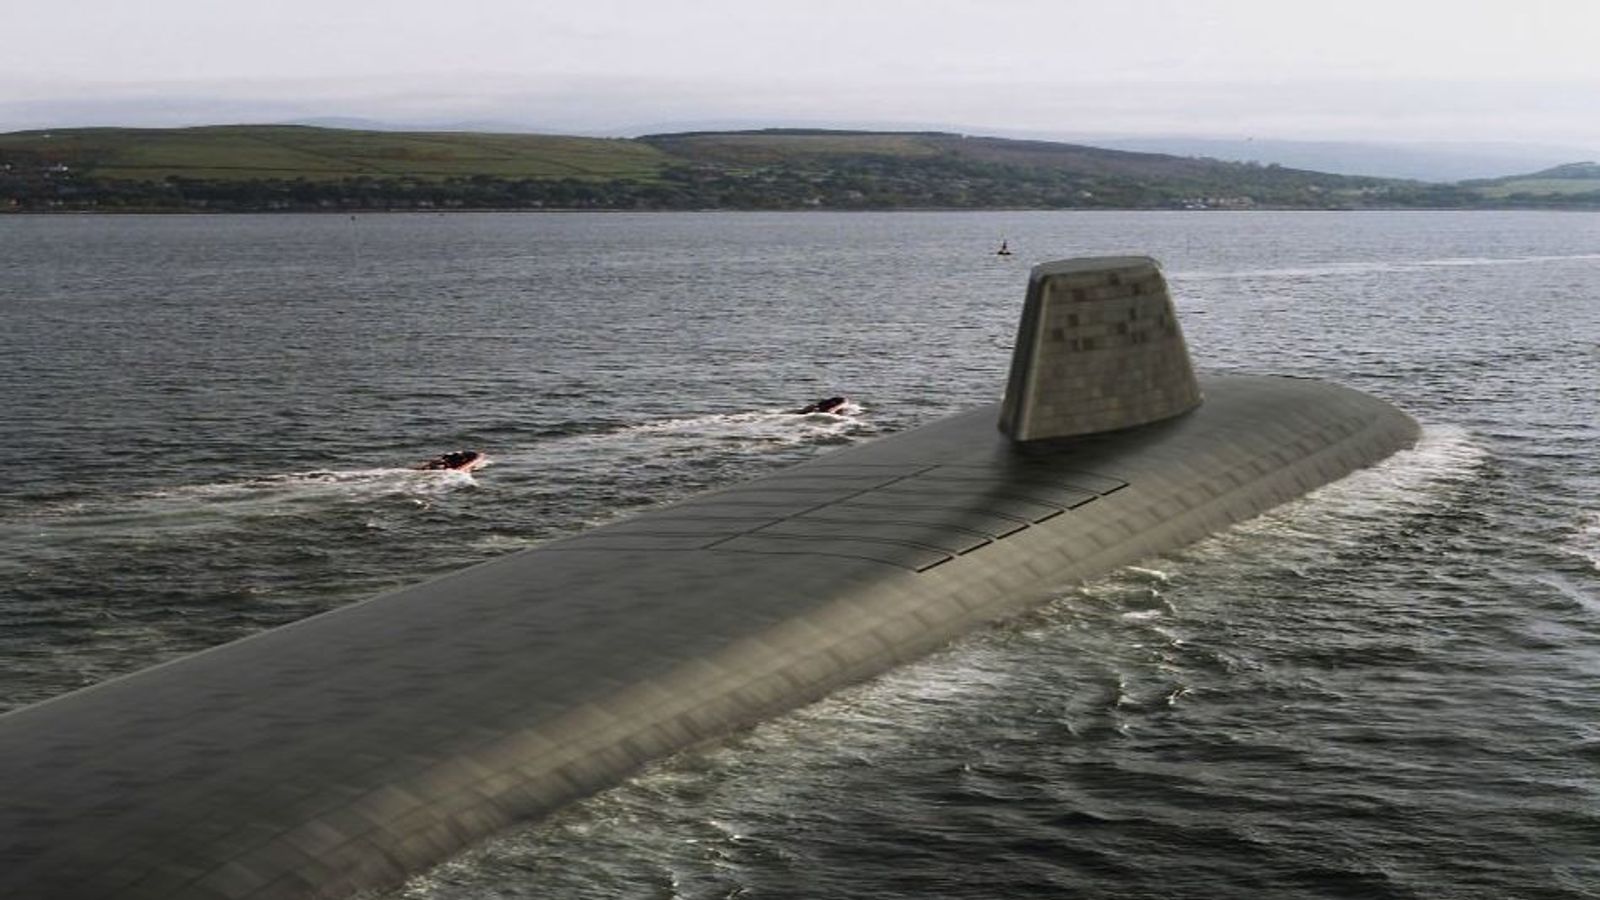 Trident: The UK's Nuclear Deterrent